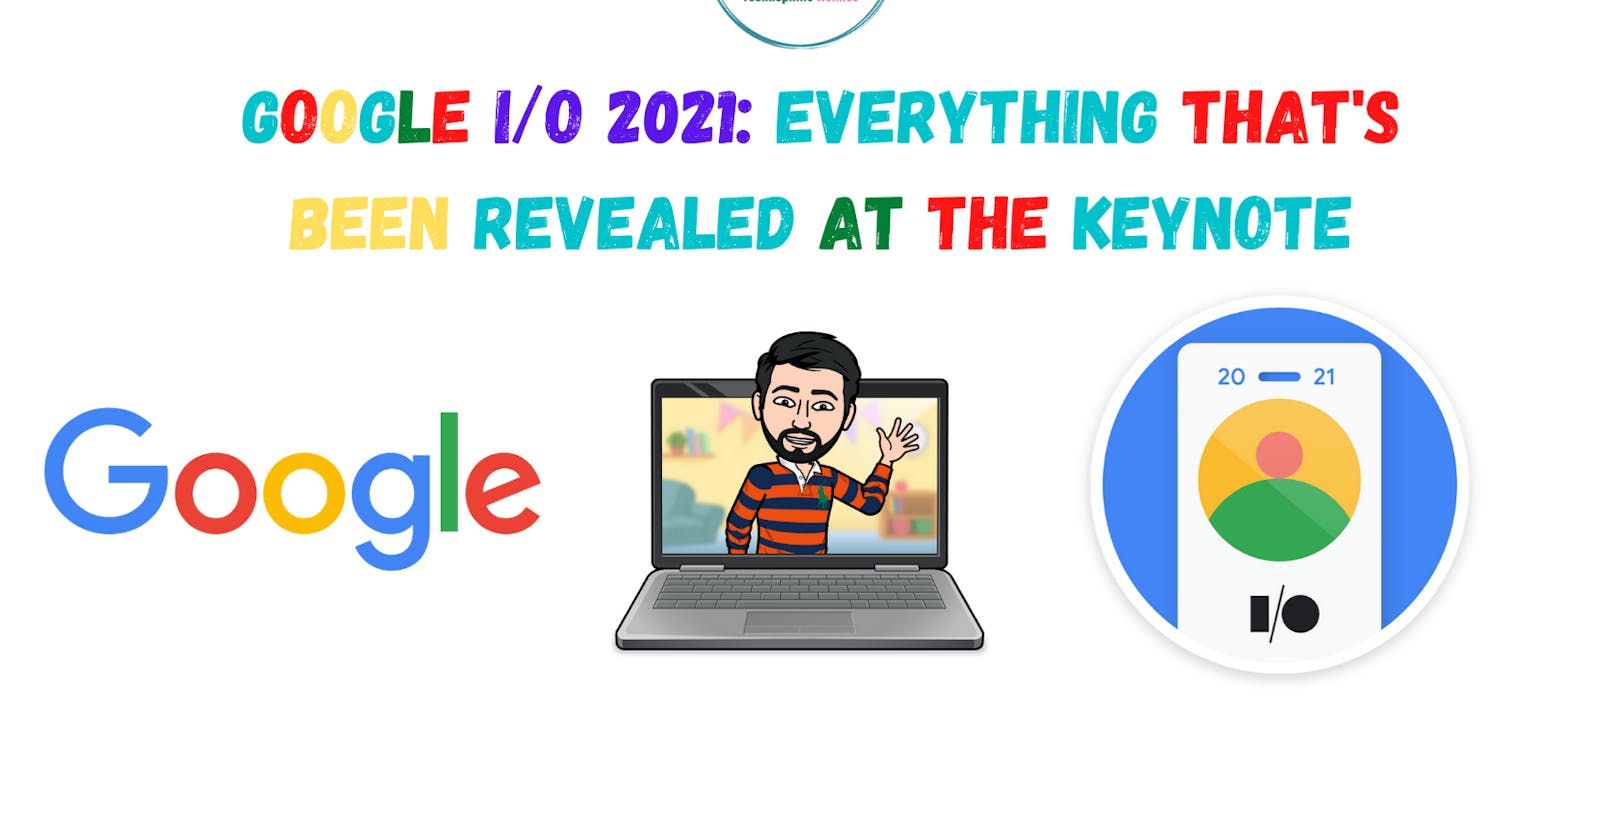 Google I/O 2021: Everything that's been revealed at the keynote